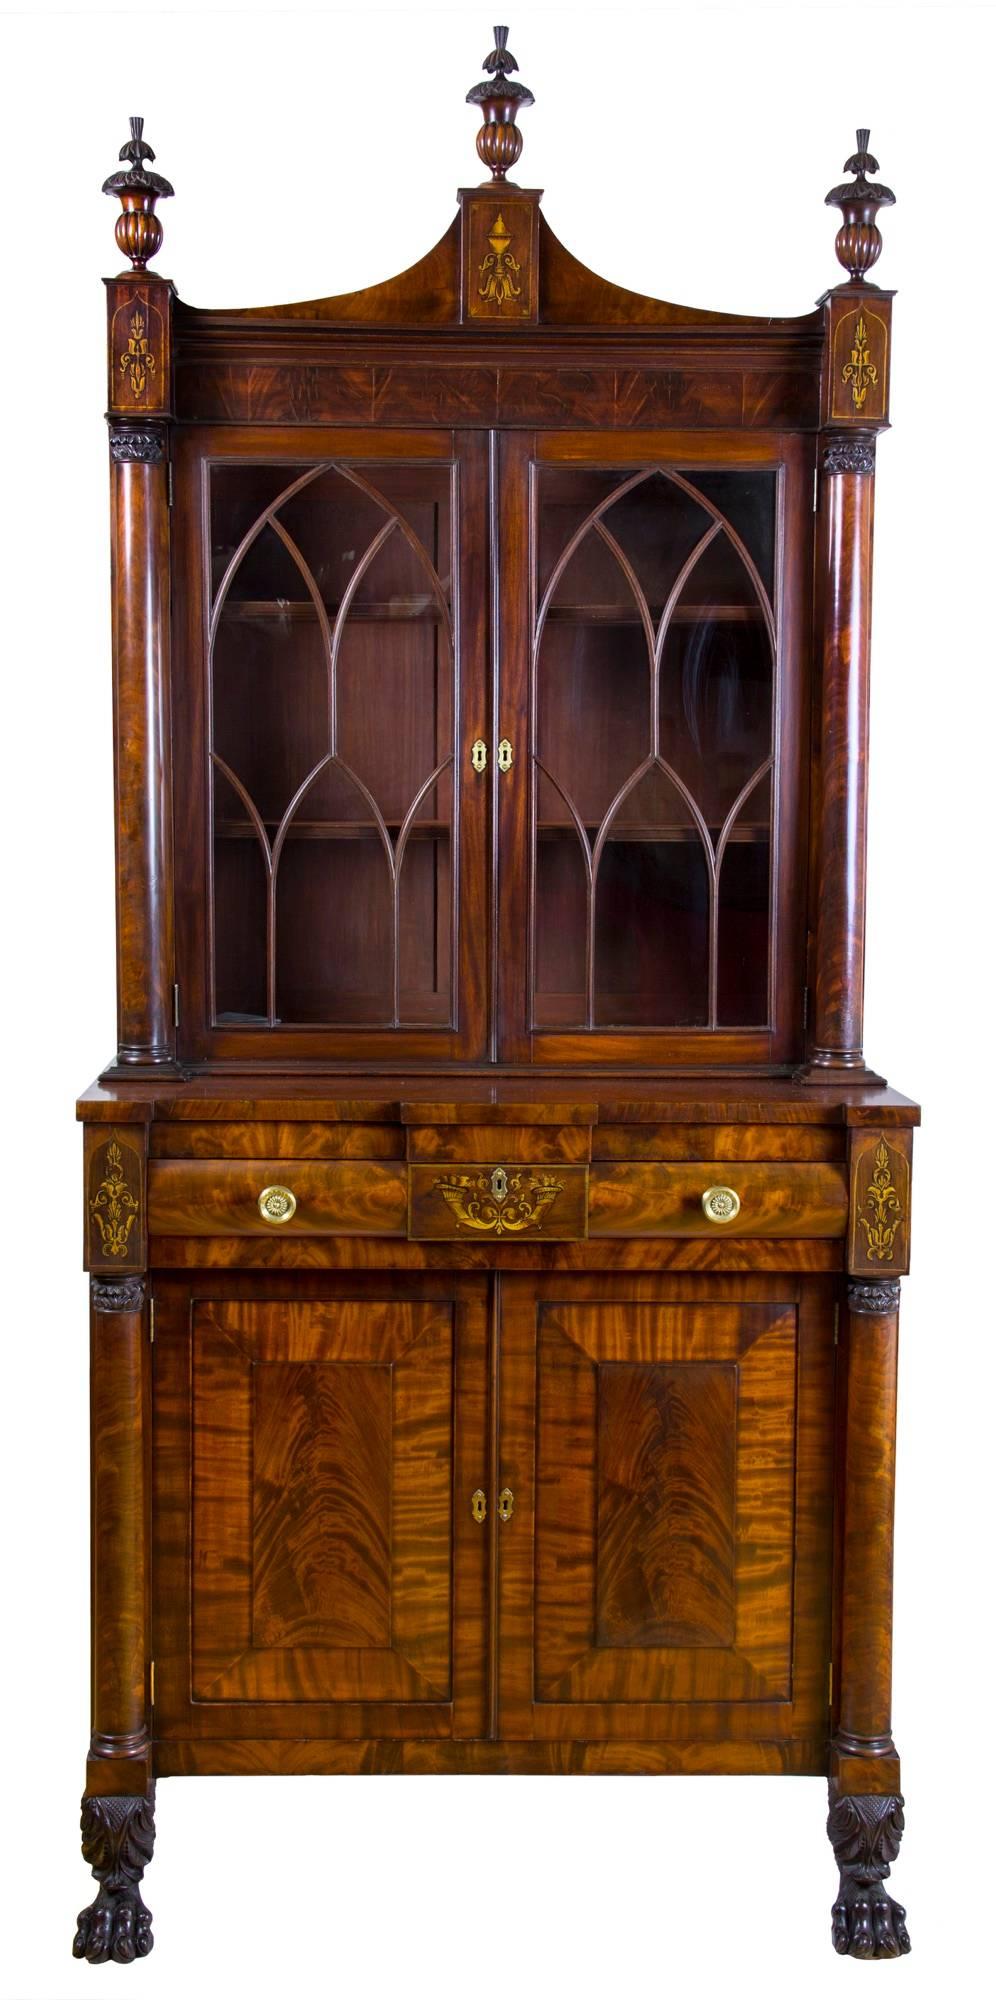 This is a magnificent and stately classical secretary which relates to a small grouping of elite cabinetmakers located in what is now Downtown Manhattan. Here Edward Holmes formed a partnership with Simeon Haines in 1825 and was a competitor of